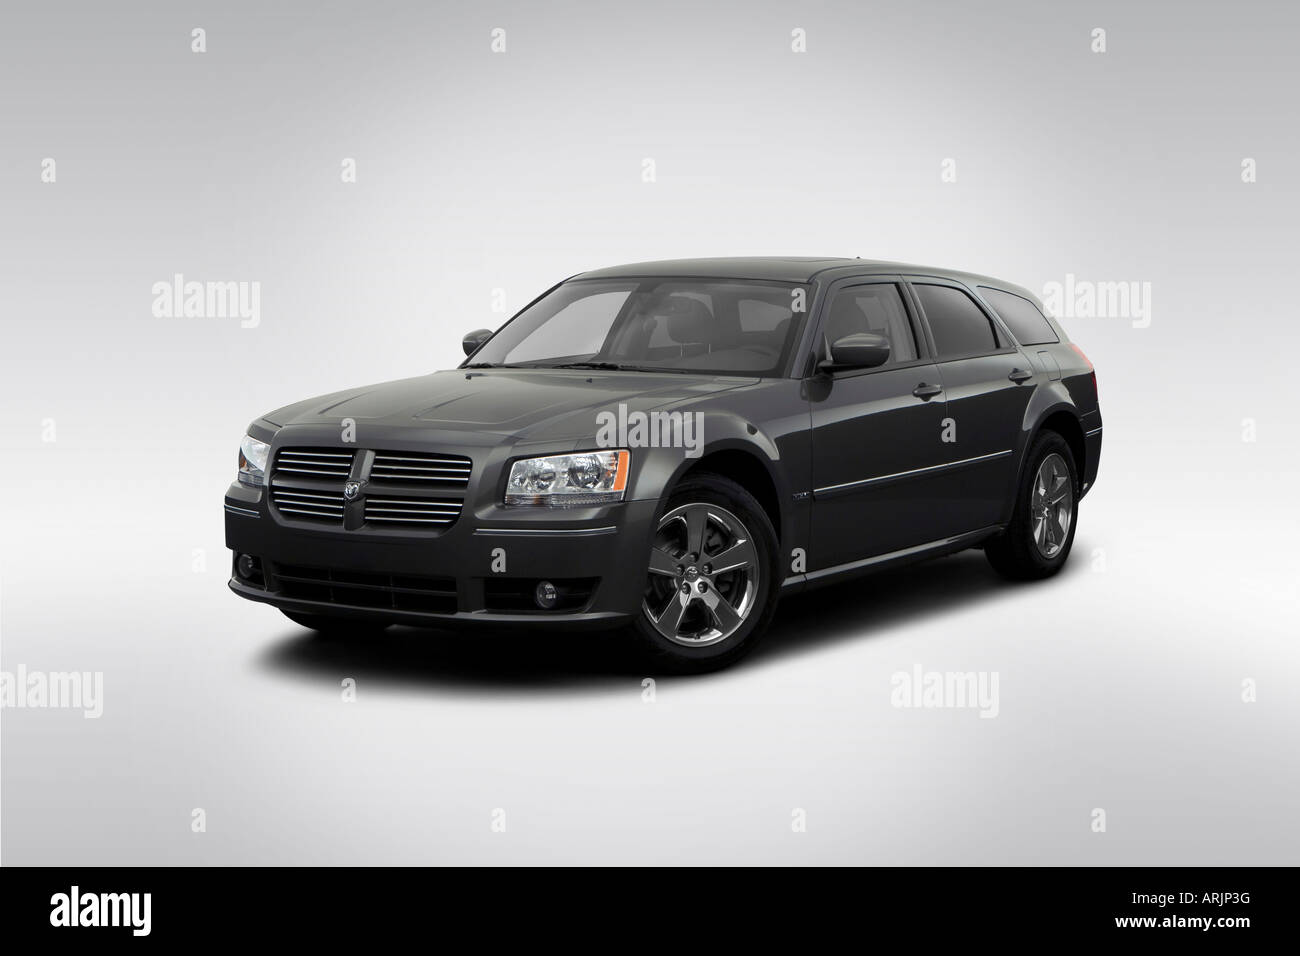 2008 Dodge Magnum R/T in Gray - Front angle view Stock Photo